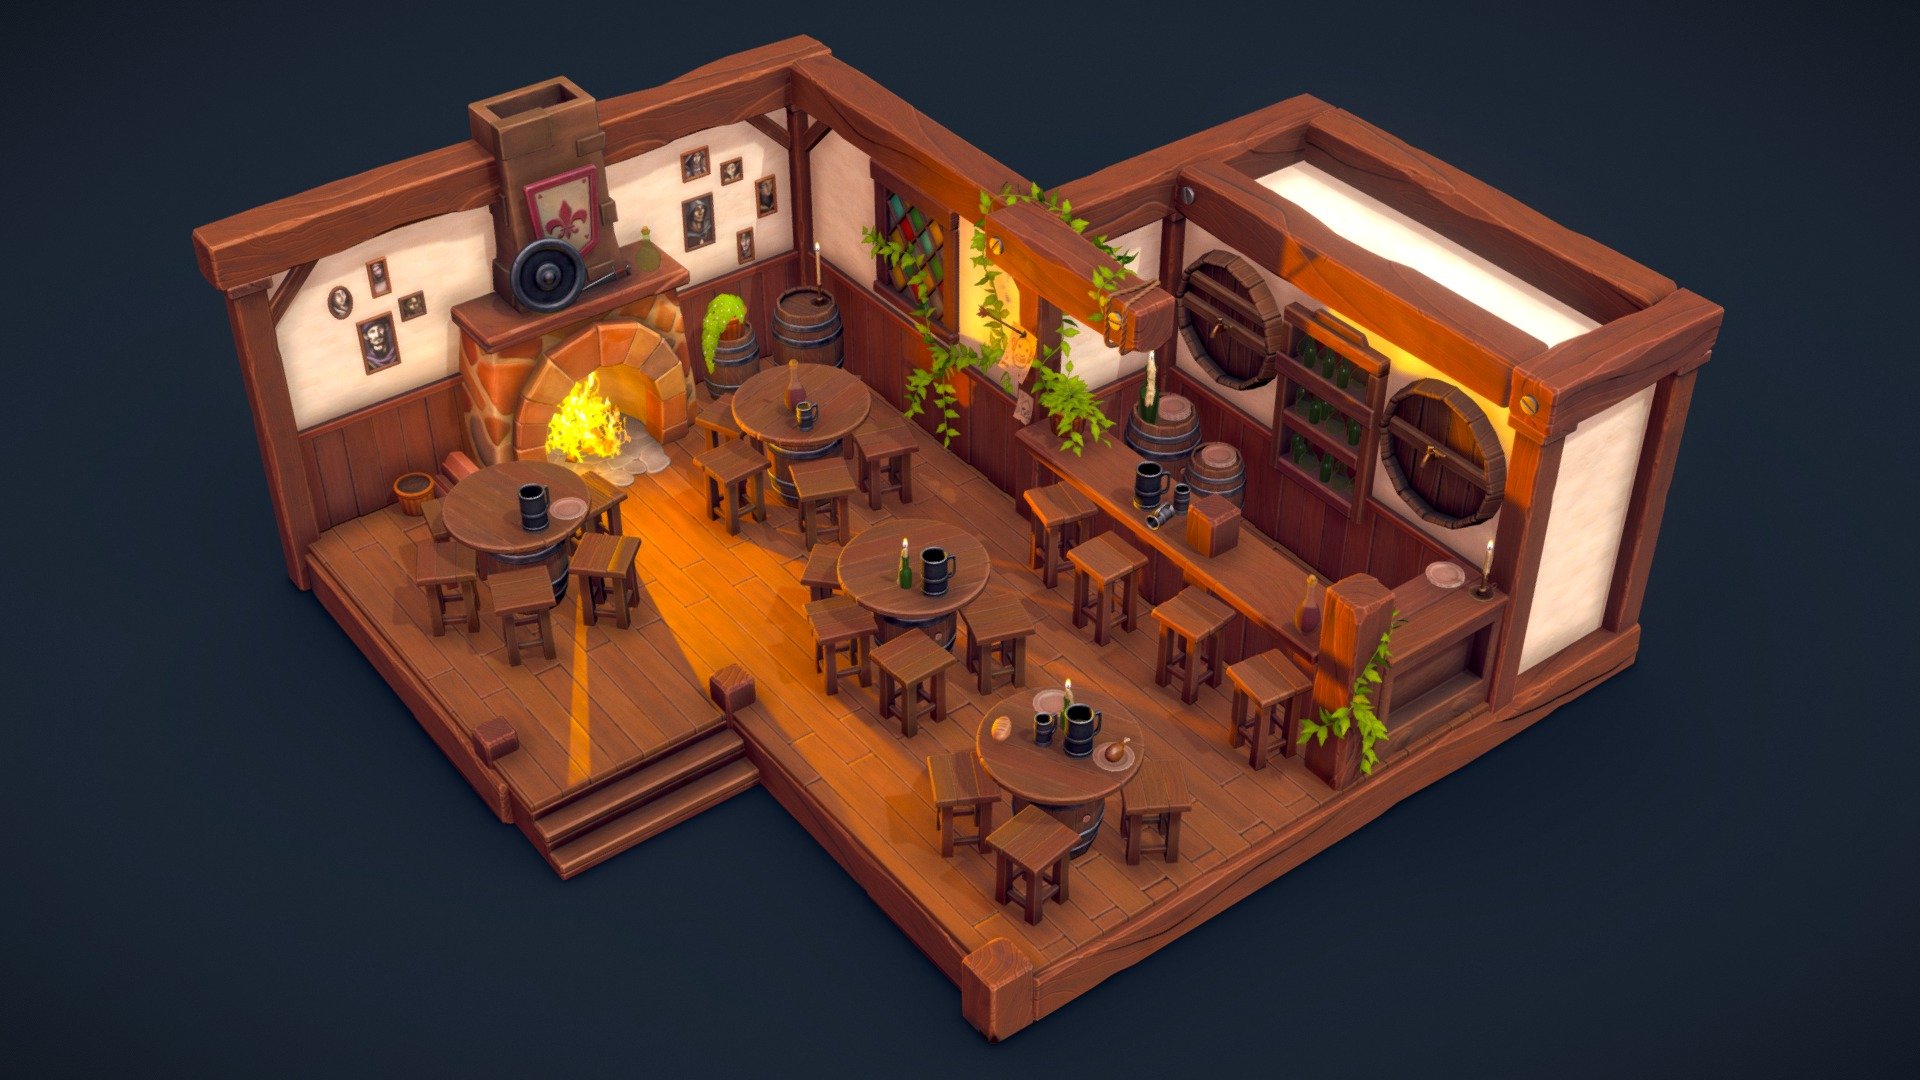 Models: Blender, ZBrush

Textures: Substance Painter

Check out the ArtStation entry for Unreal renders and breakdown.

The main goal of making this was to learn and get used to Blender, coming from Maya.

Based on the beautiful concept &ldquo;The Tavern